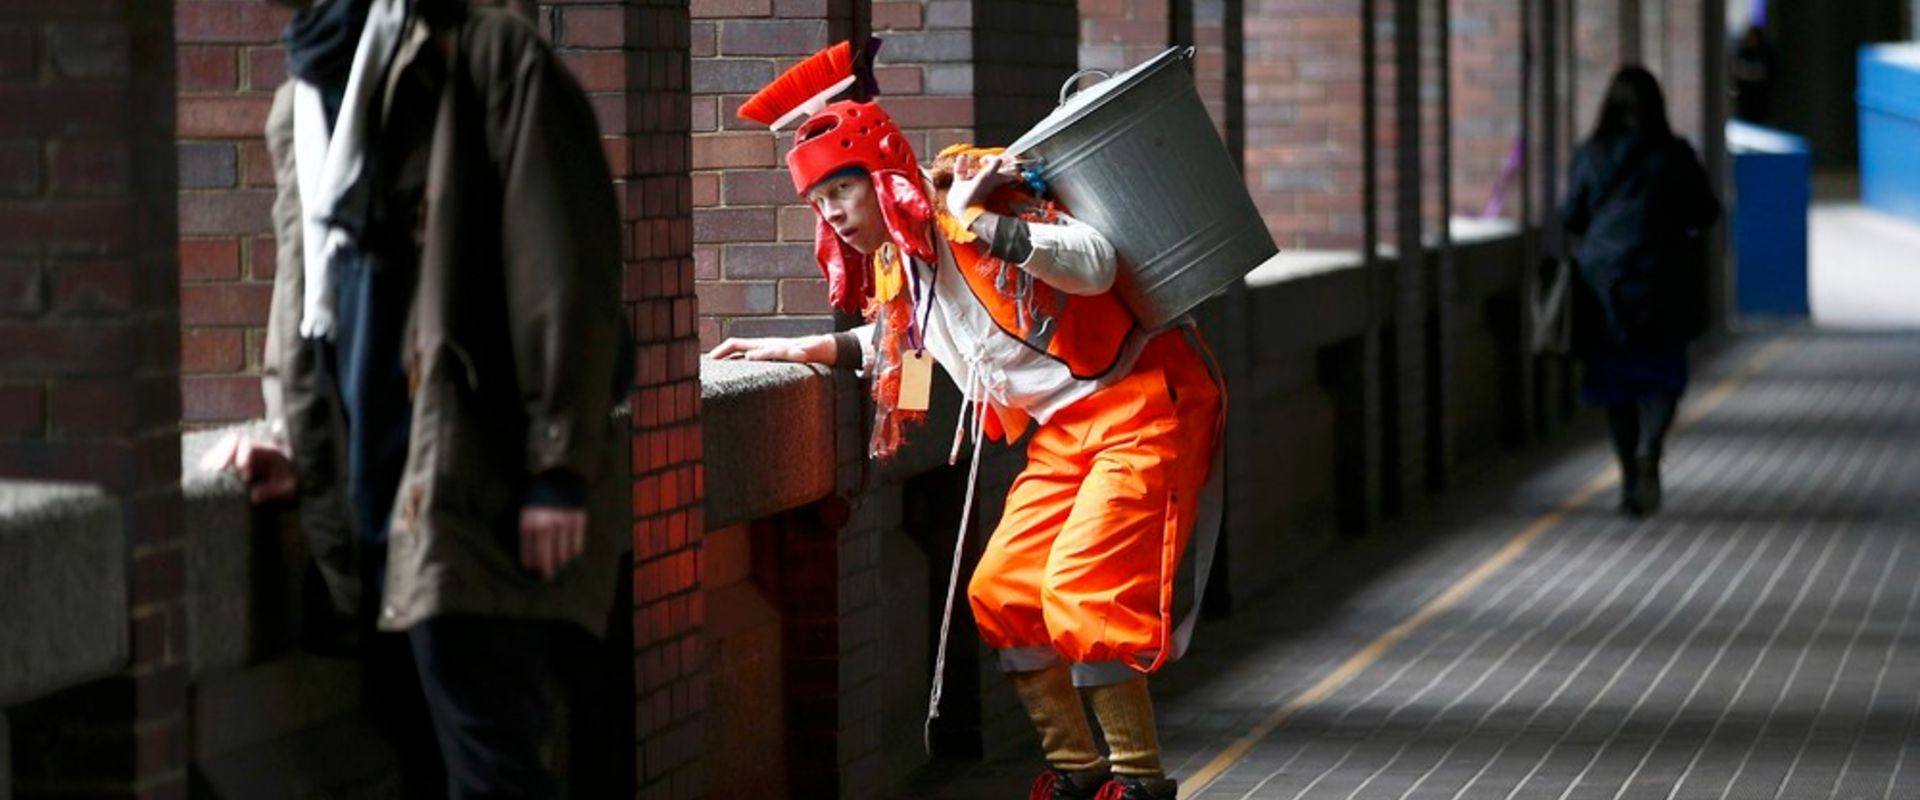 Caliban the Binman, dressed in bright orange hi-vis, and boxing headgear with a broom head atop it, carrying his bin on his back, tries, and fails to look inconspicuous.